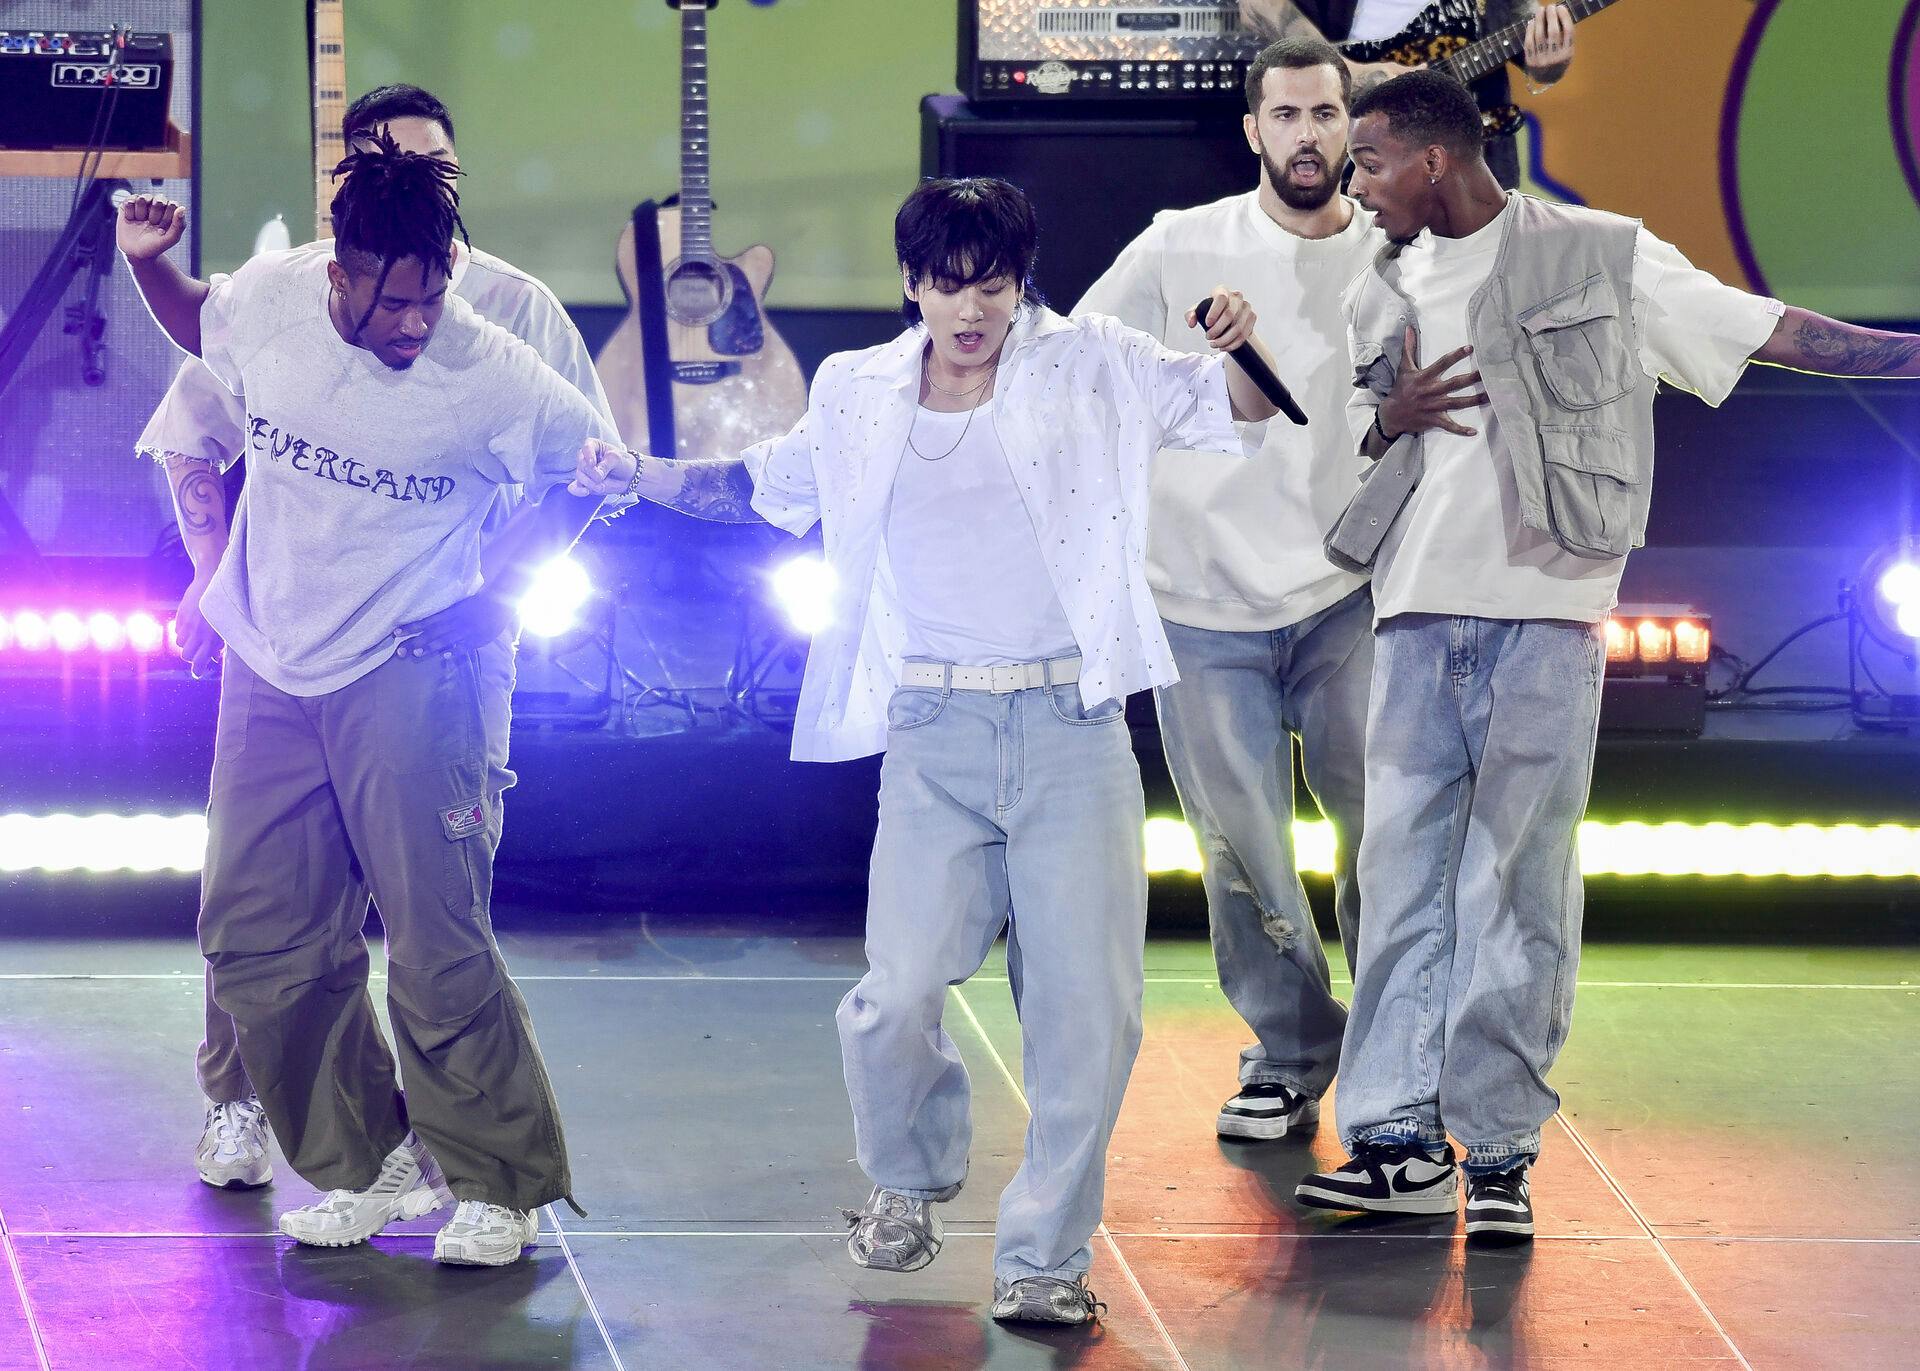 South Korean singer Jung Kook, center, from the K-pop band BTS performs solo on ABC's "Good Morning America" at Rumsey Playfield/SummerStage on Friday, July 14, 2023, in New York. (Photo by Evan Agostini/Invision/AP)